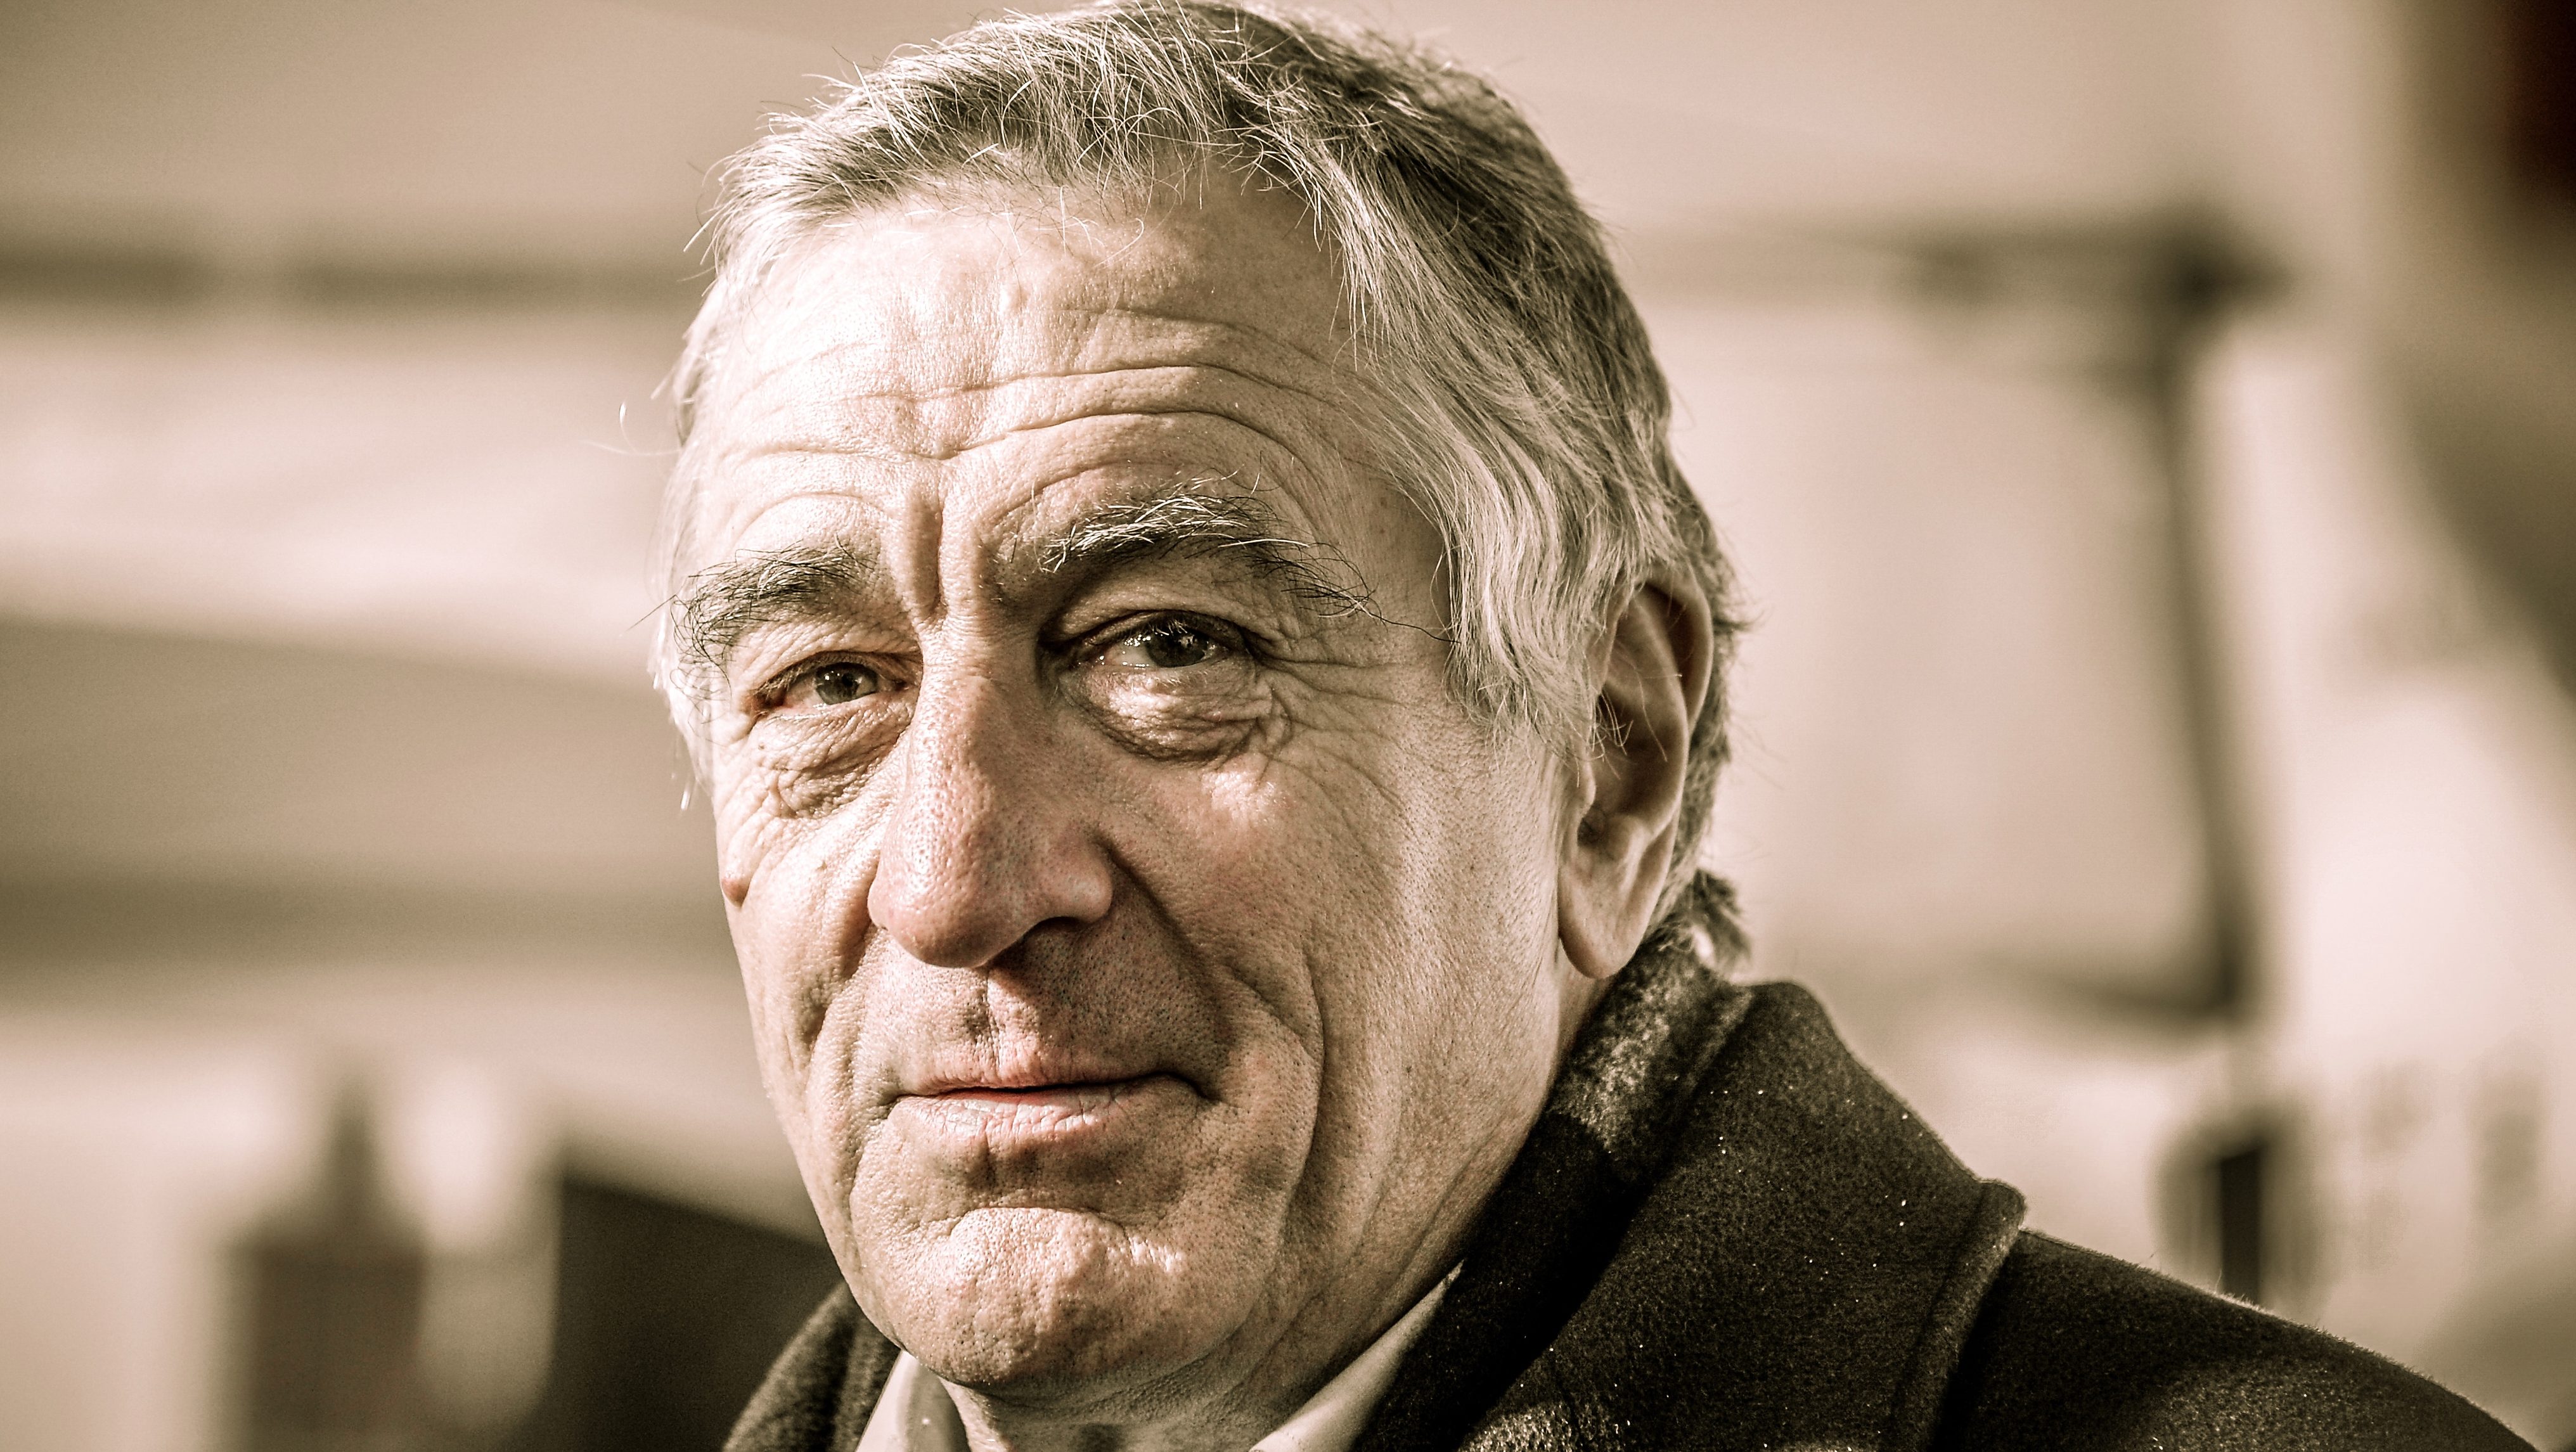 Robert De Niro S Age And Height The Movie Star S Background And Stats